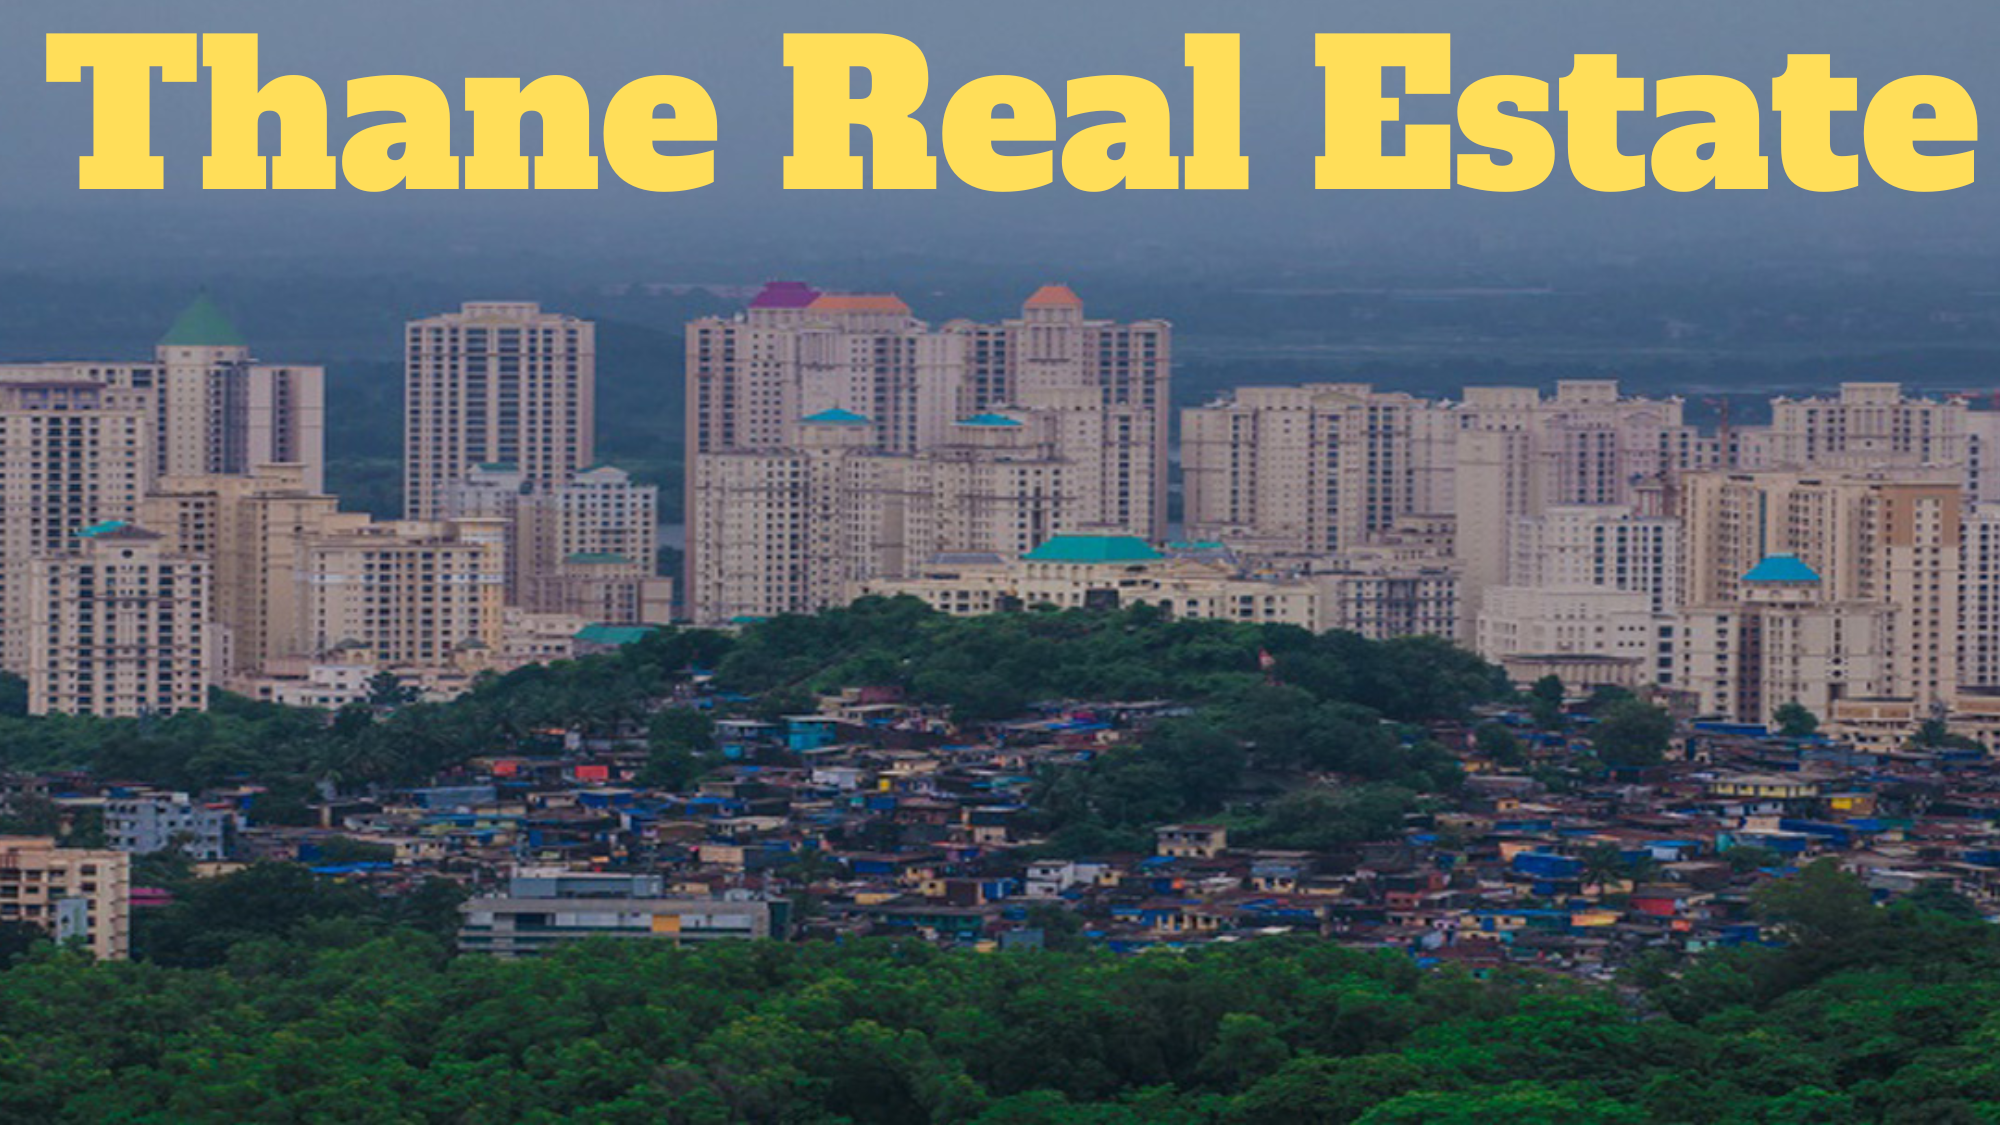 Why Thane is Real Estate hub for Residential and Commercial projects?